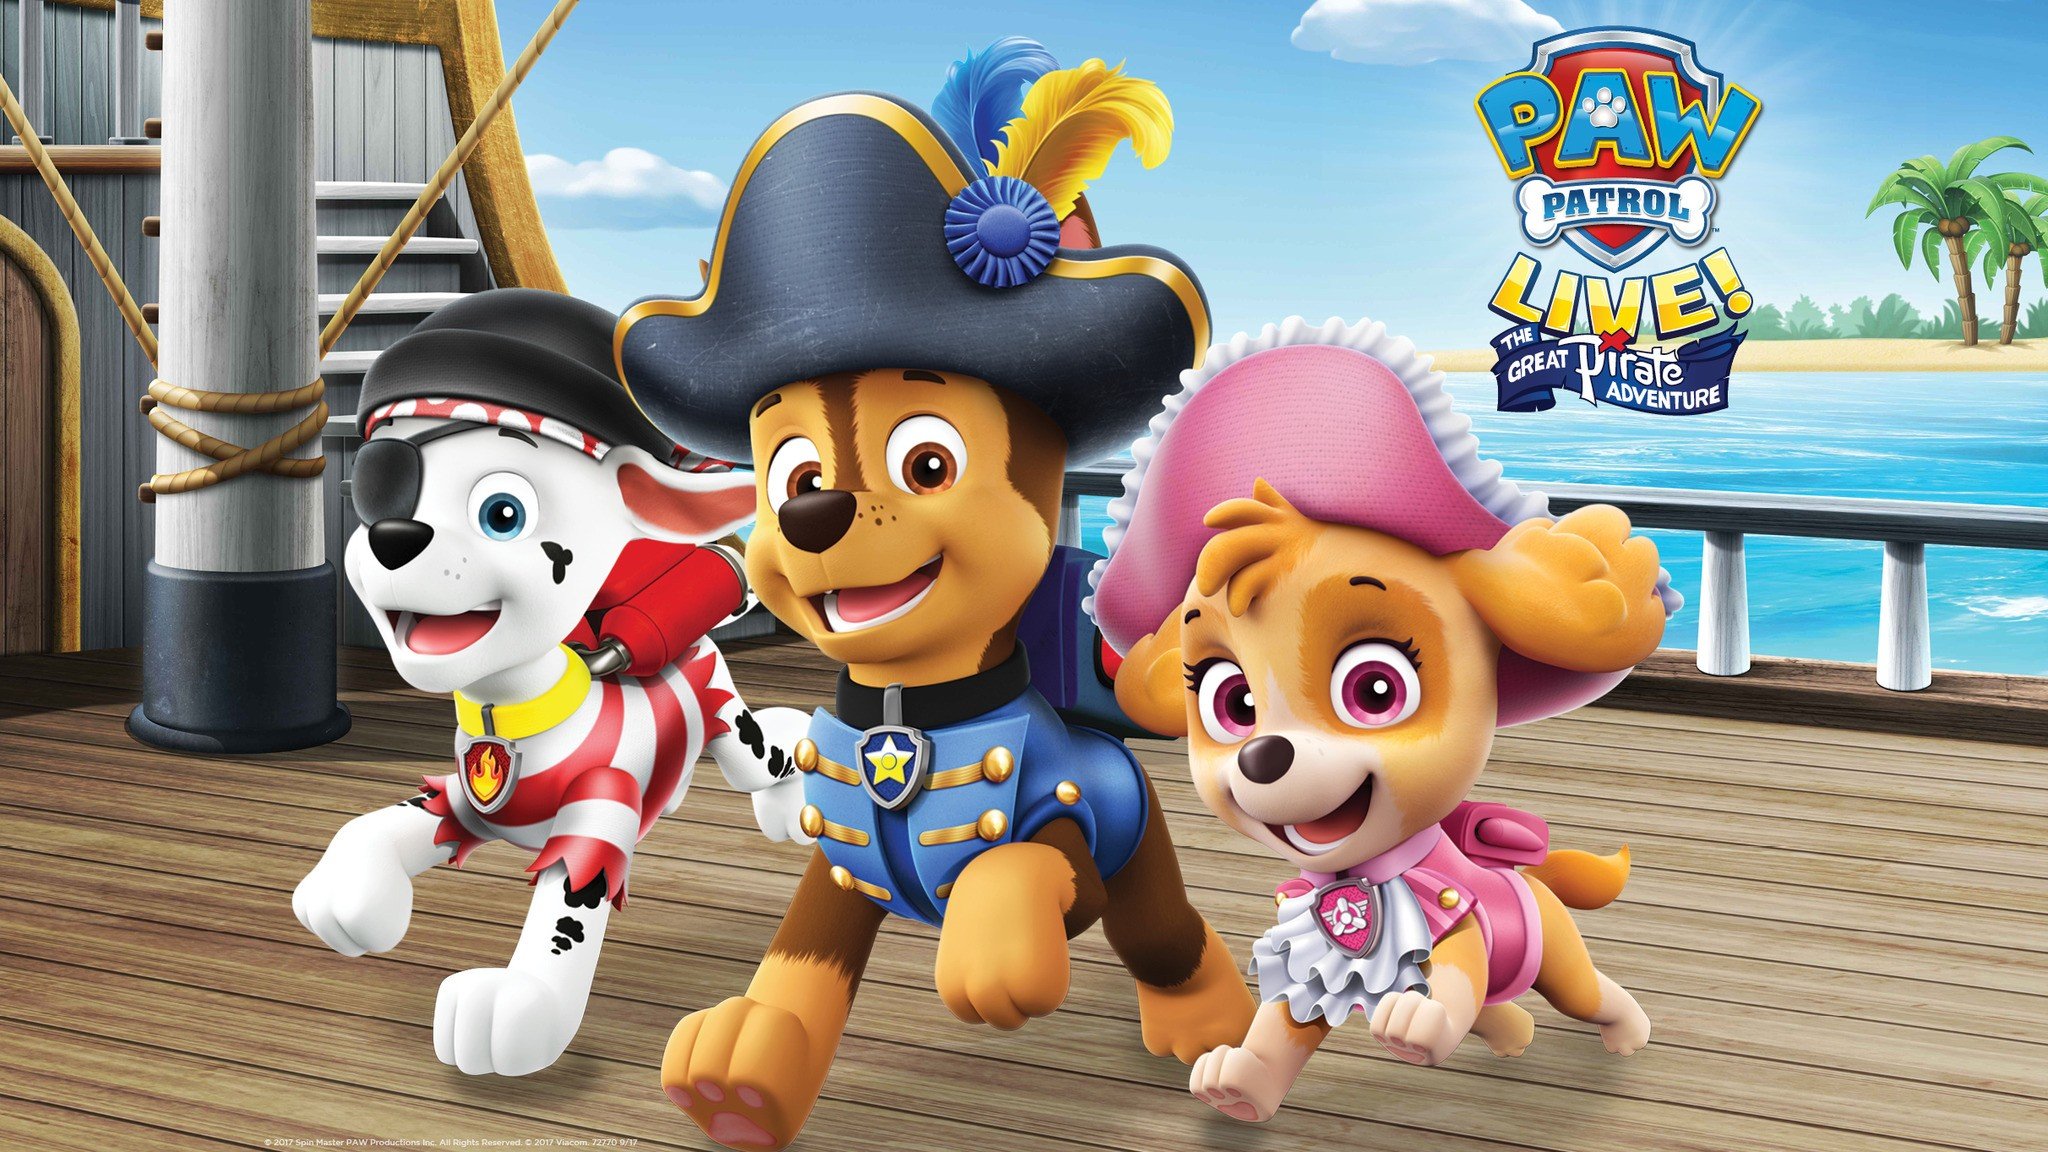 Paw Patrol Live The Great Pirate Adventure   Paw Patrol The Great